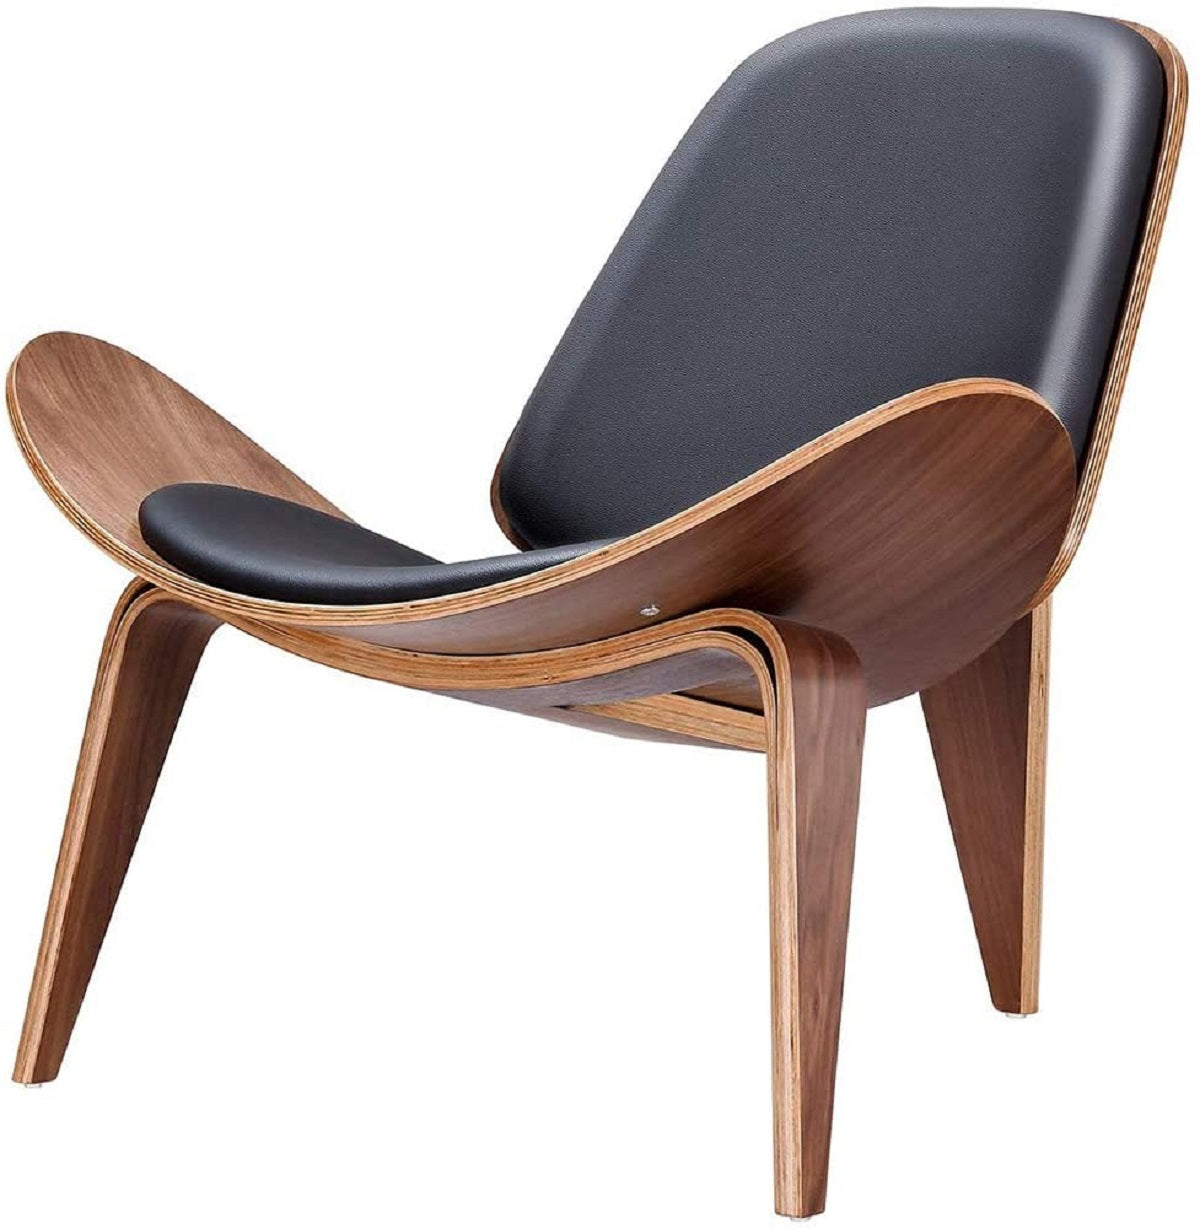 ViscoLogic Tranquil Contemporary Tripod Lounge Chair Plywood Walnut Vaneer Accent Shell Chair (Black)